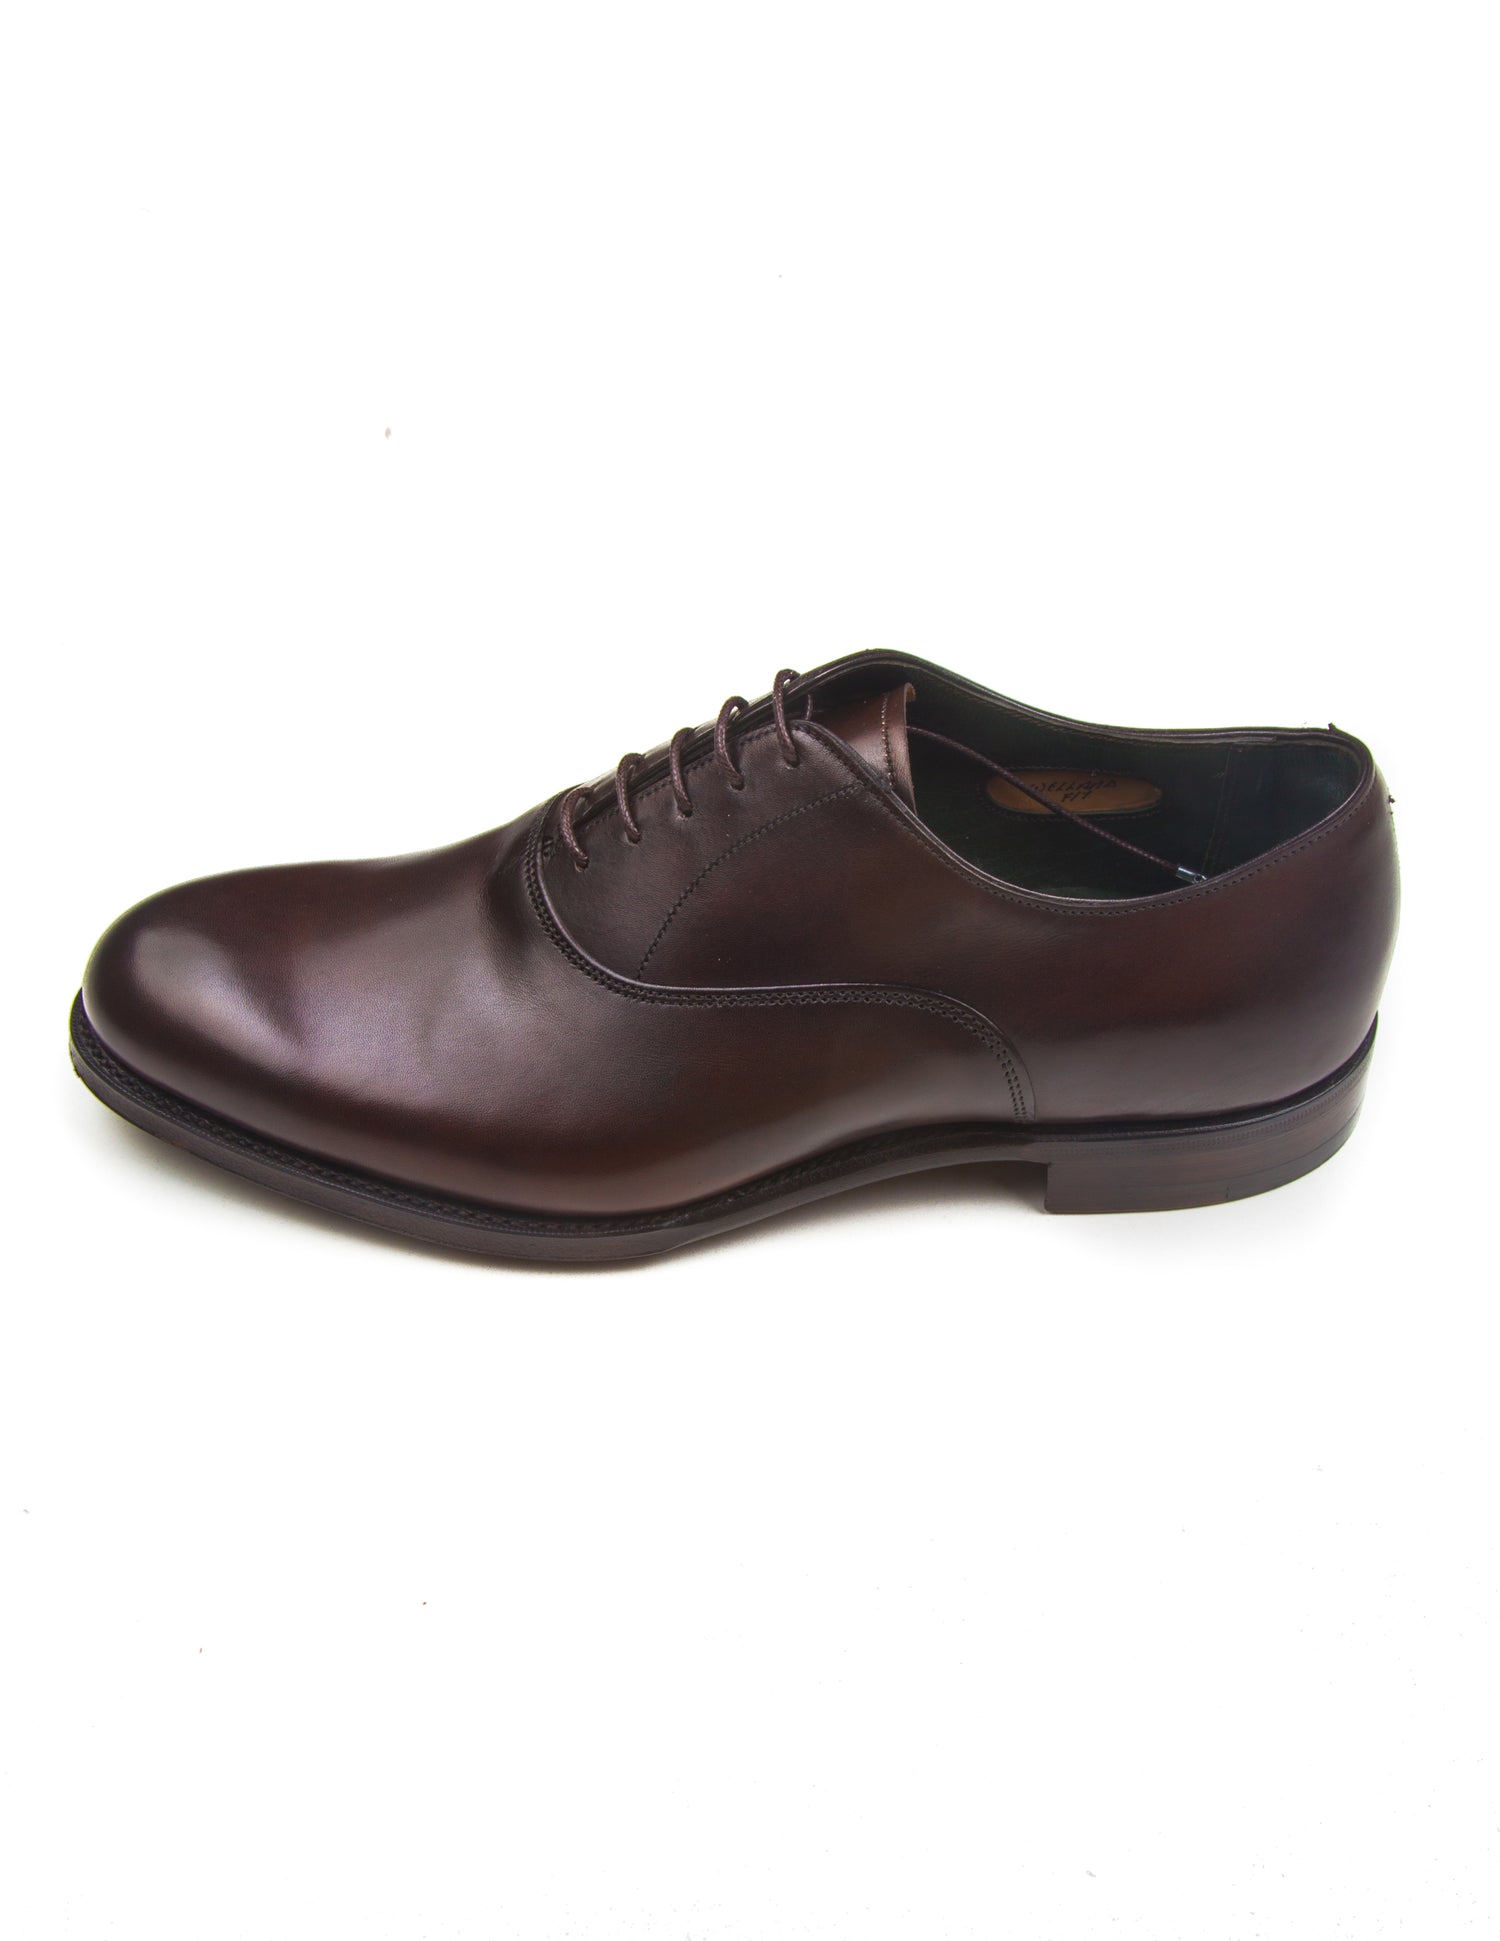 Side shot of Joseph Cheaney Welland Oxford Shoes in Mocha Calf Leather